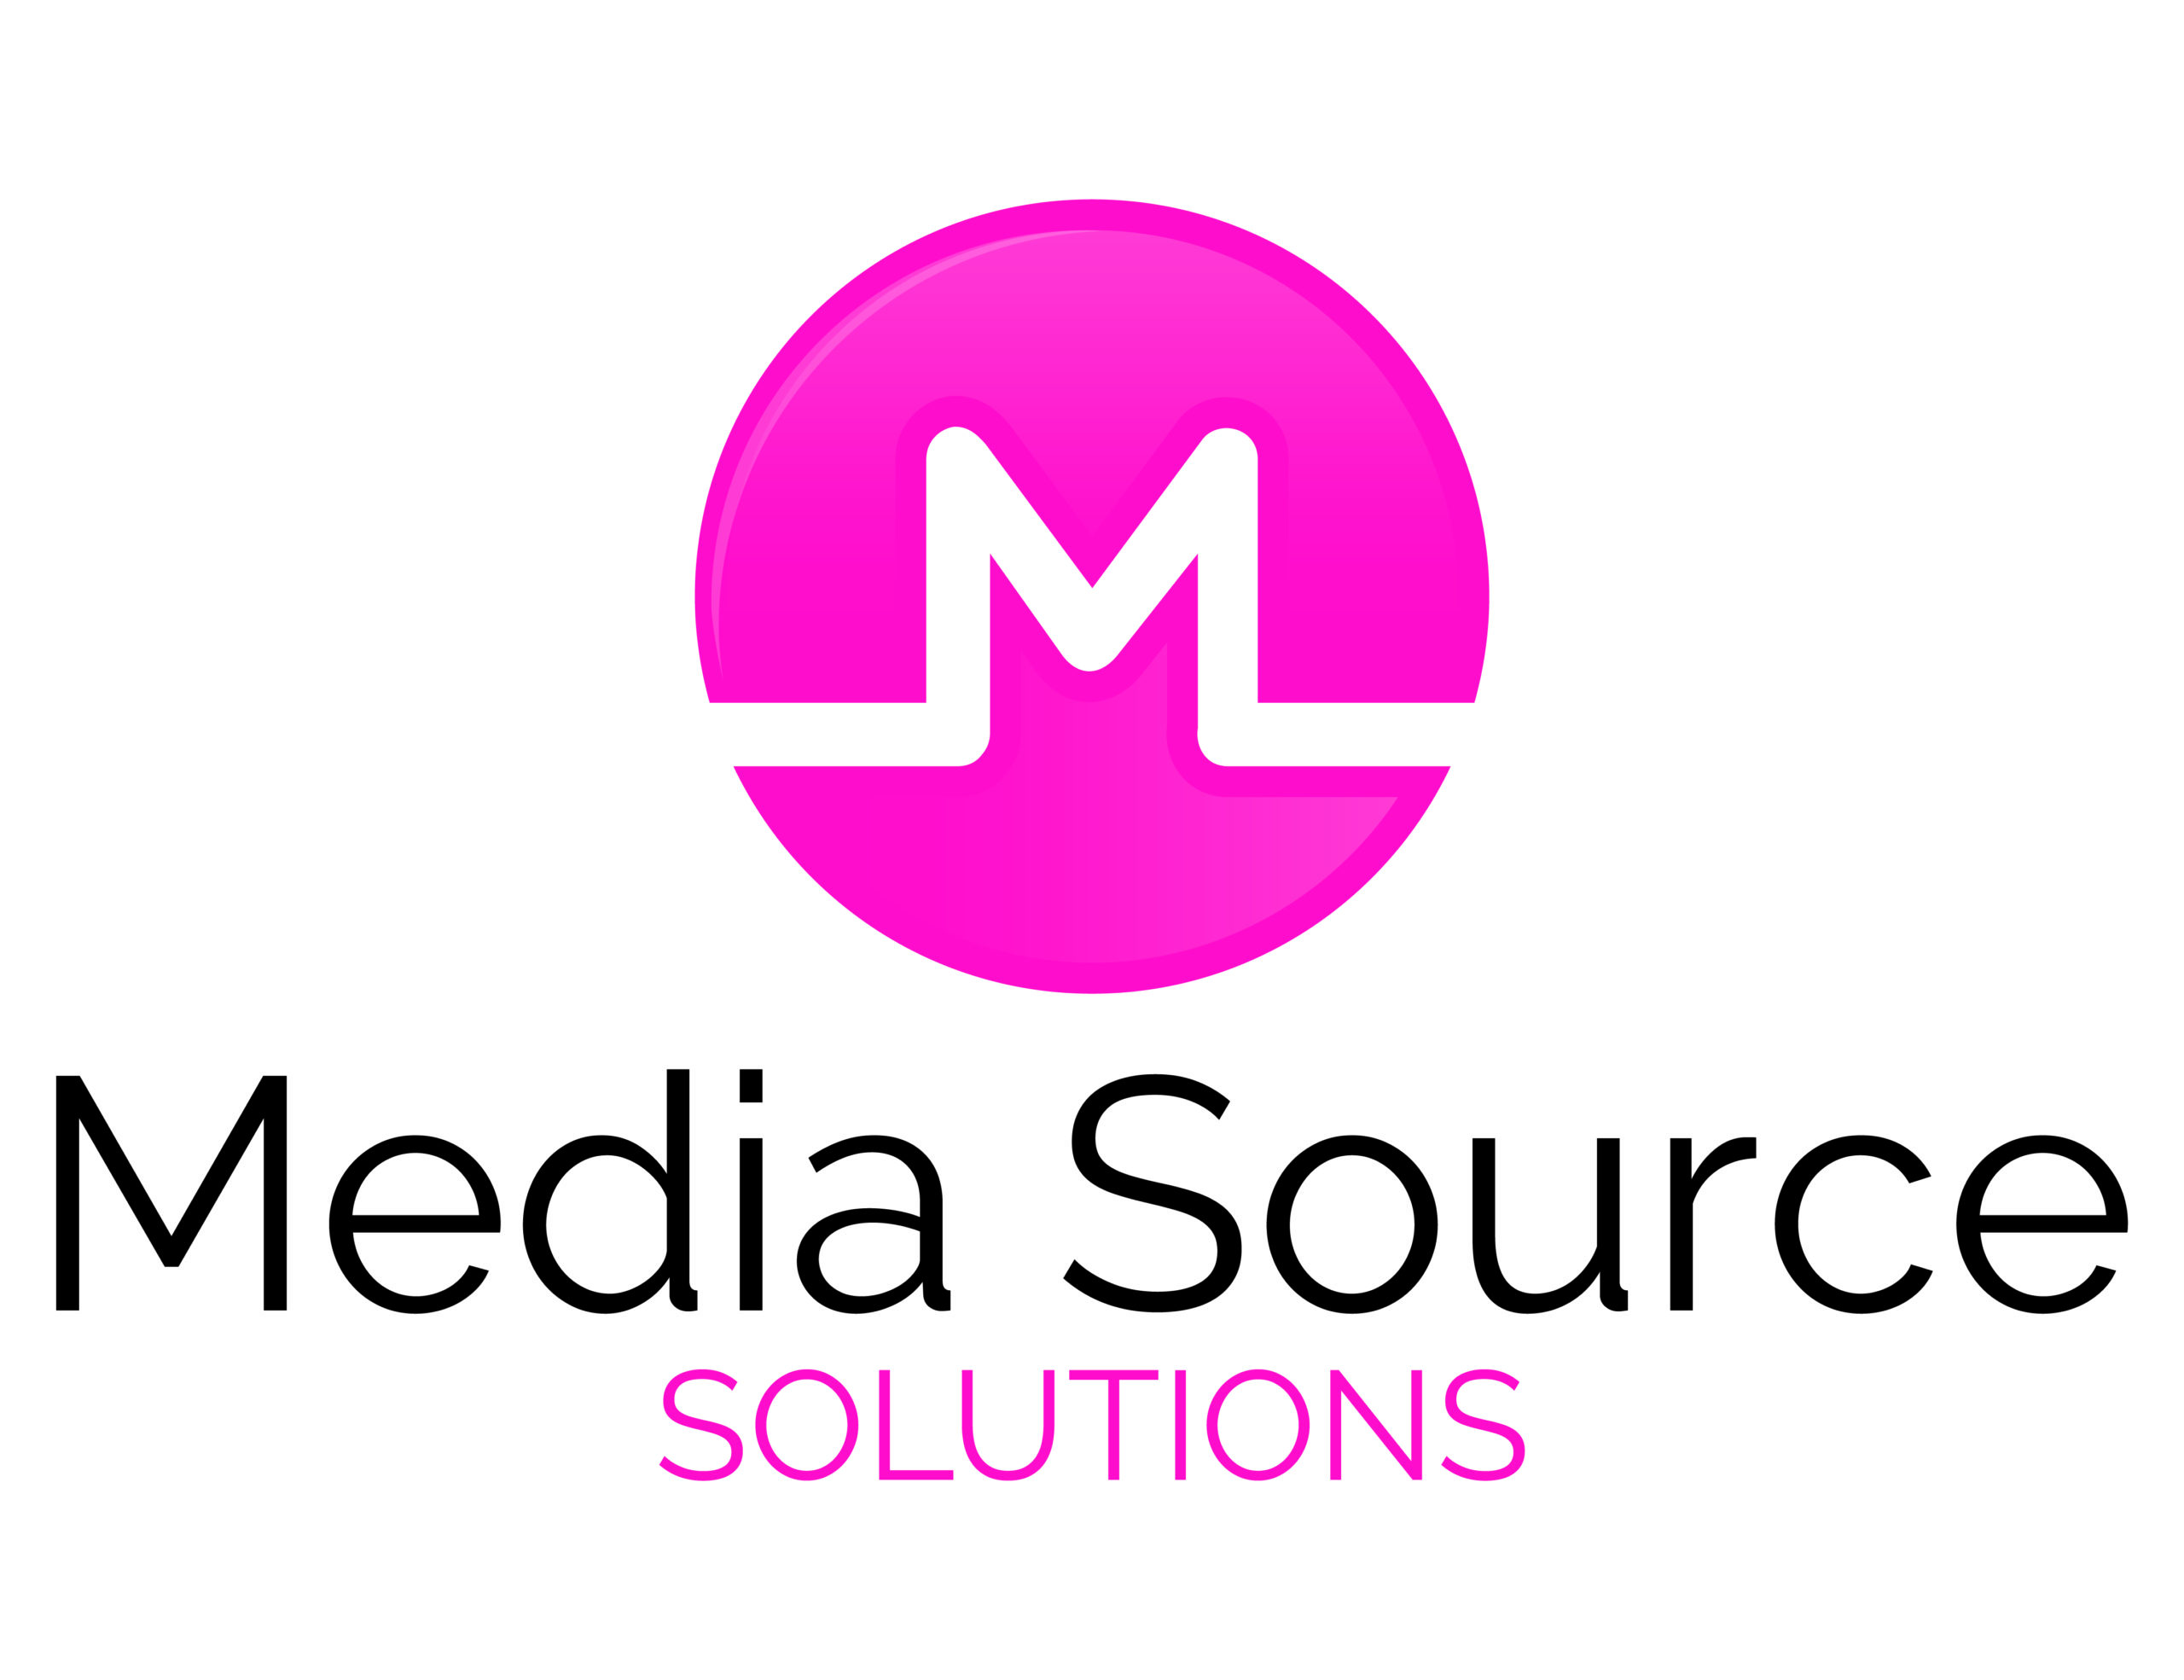 Media Source Solutions